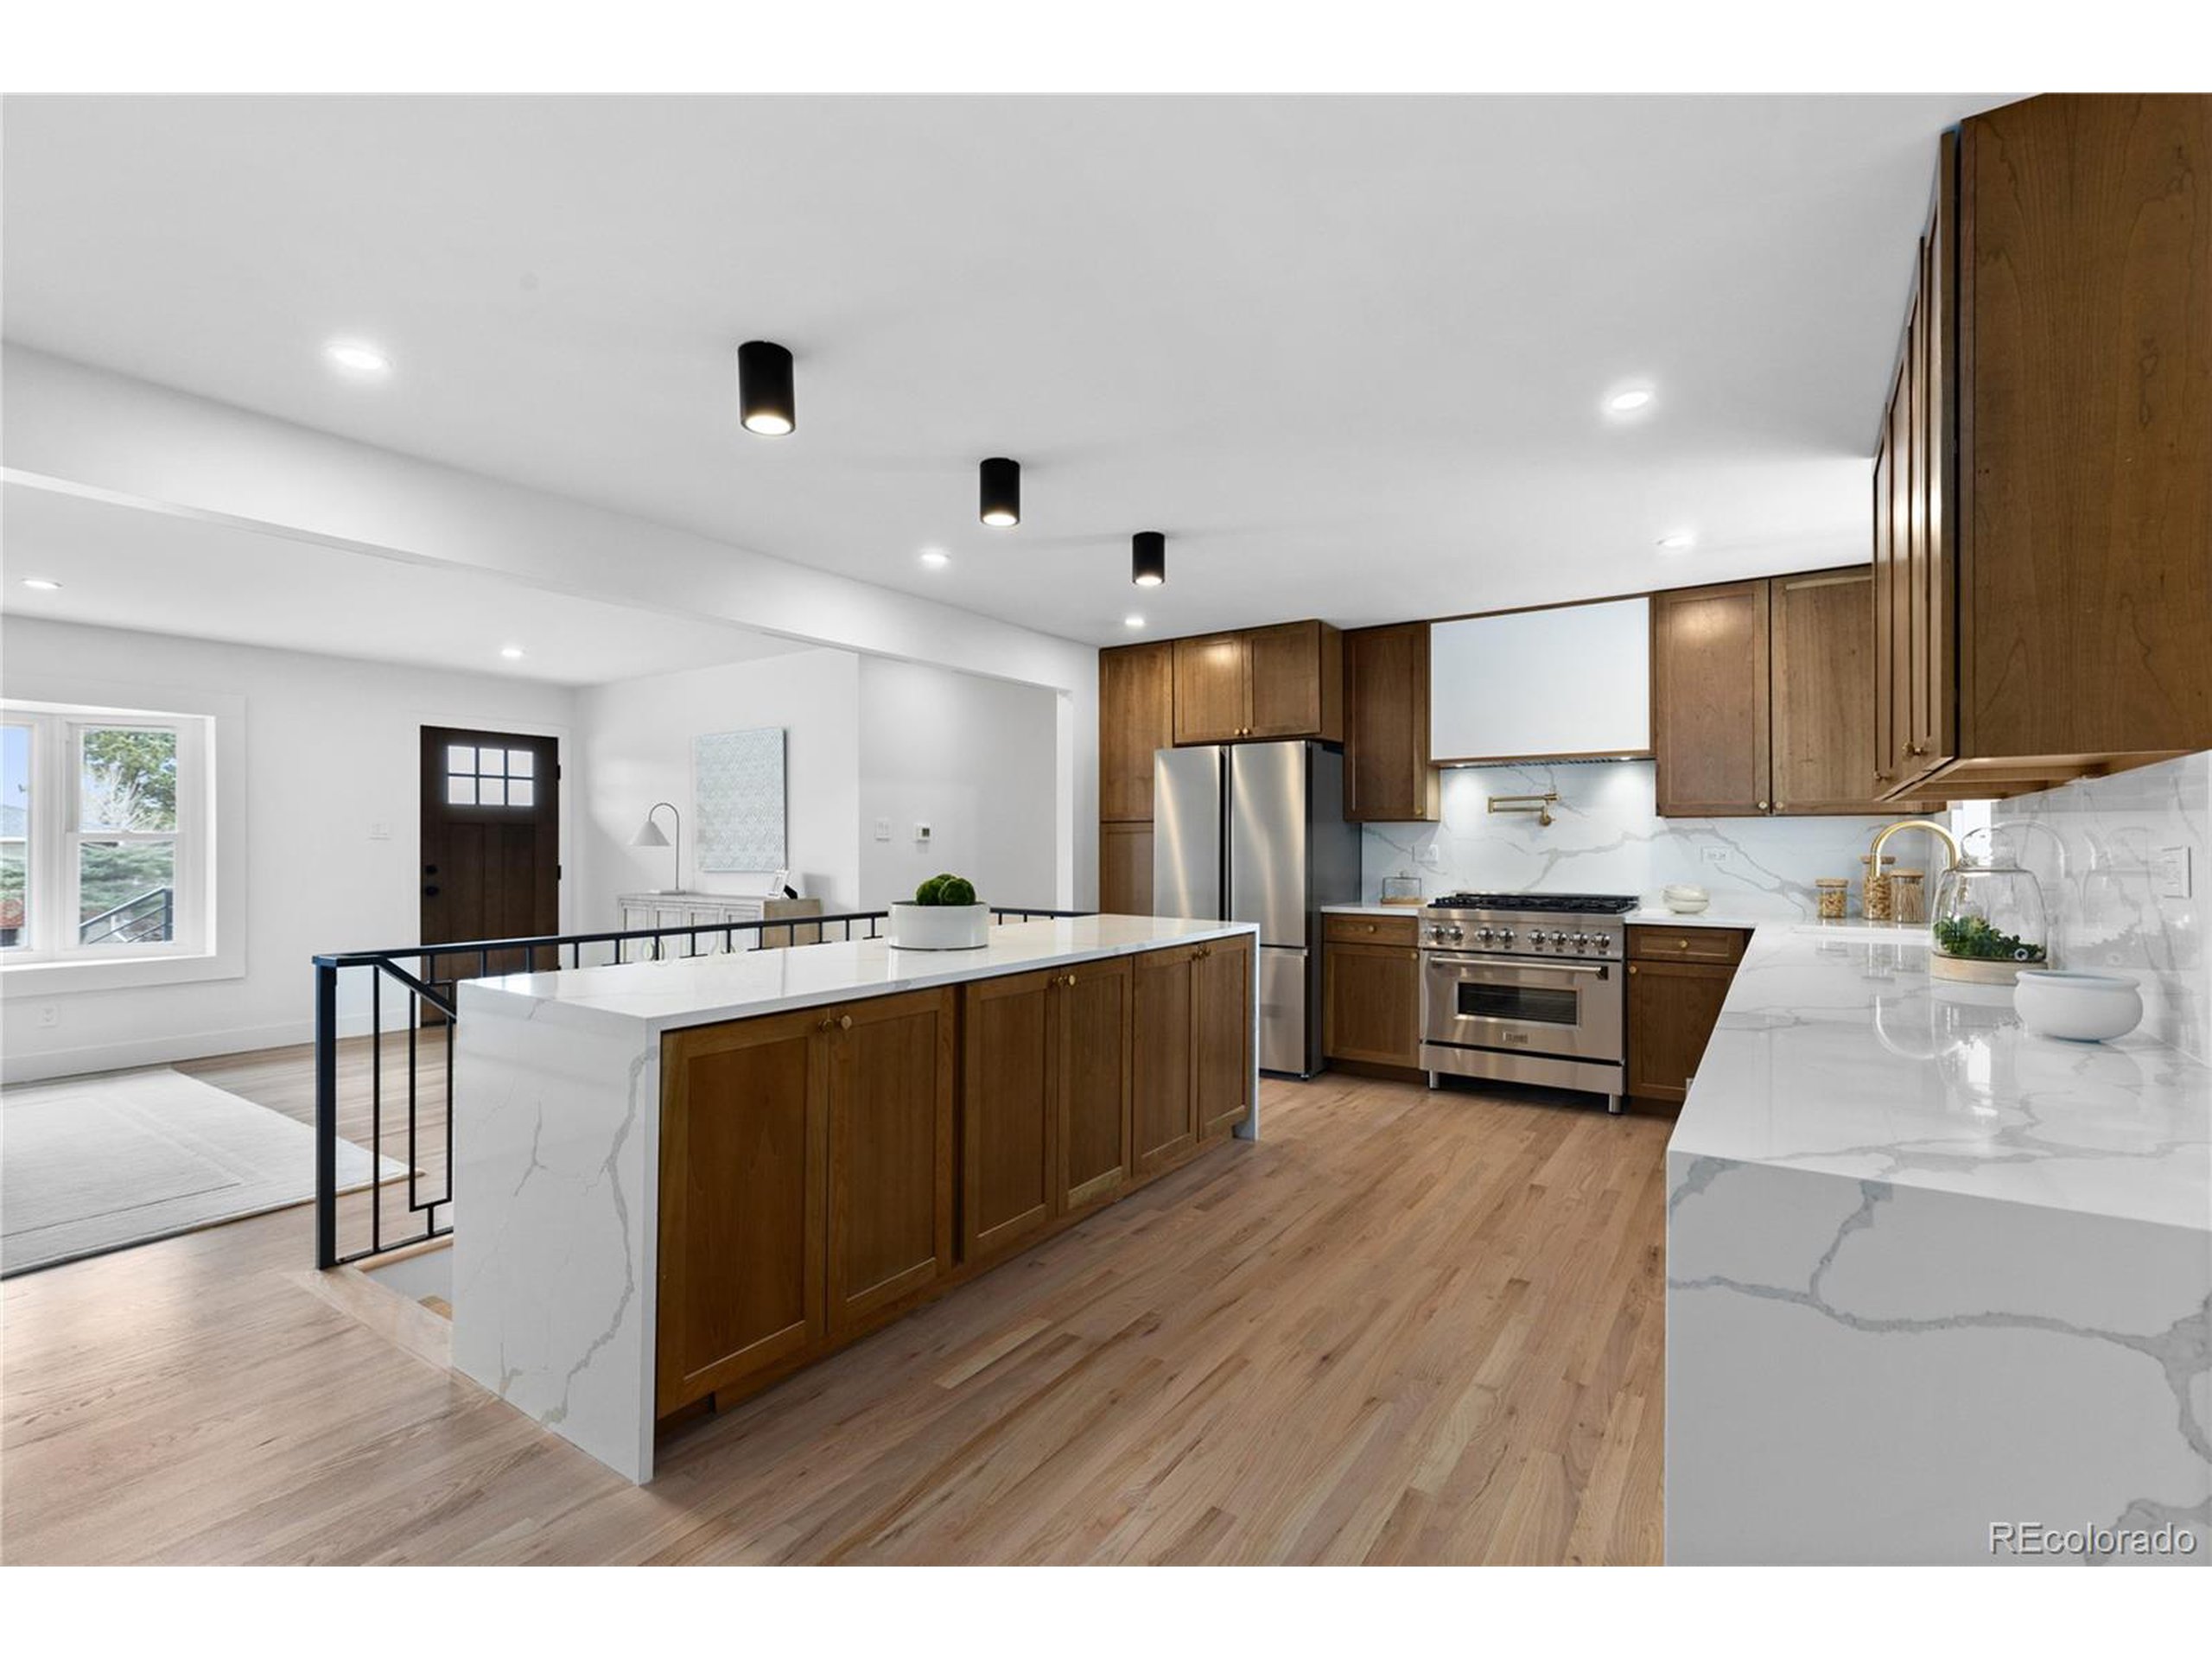 a kitchen with stainless steel appliances kitchen island wooden cabinets and granite counter tops